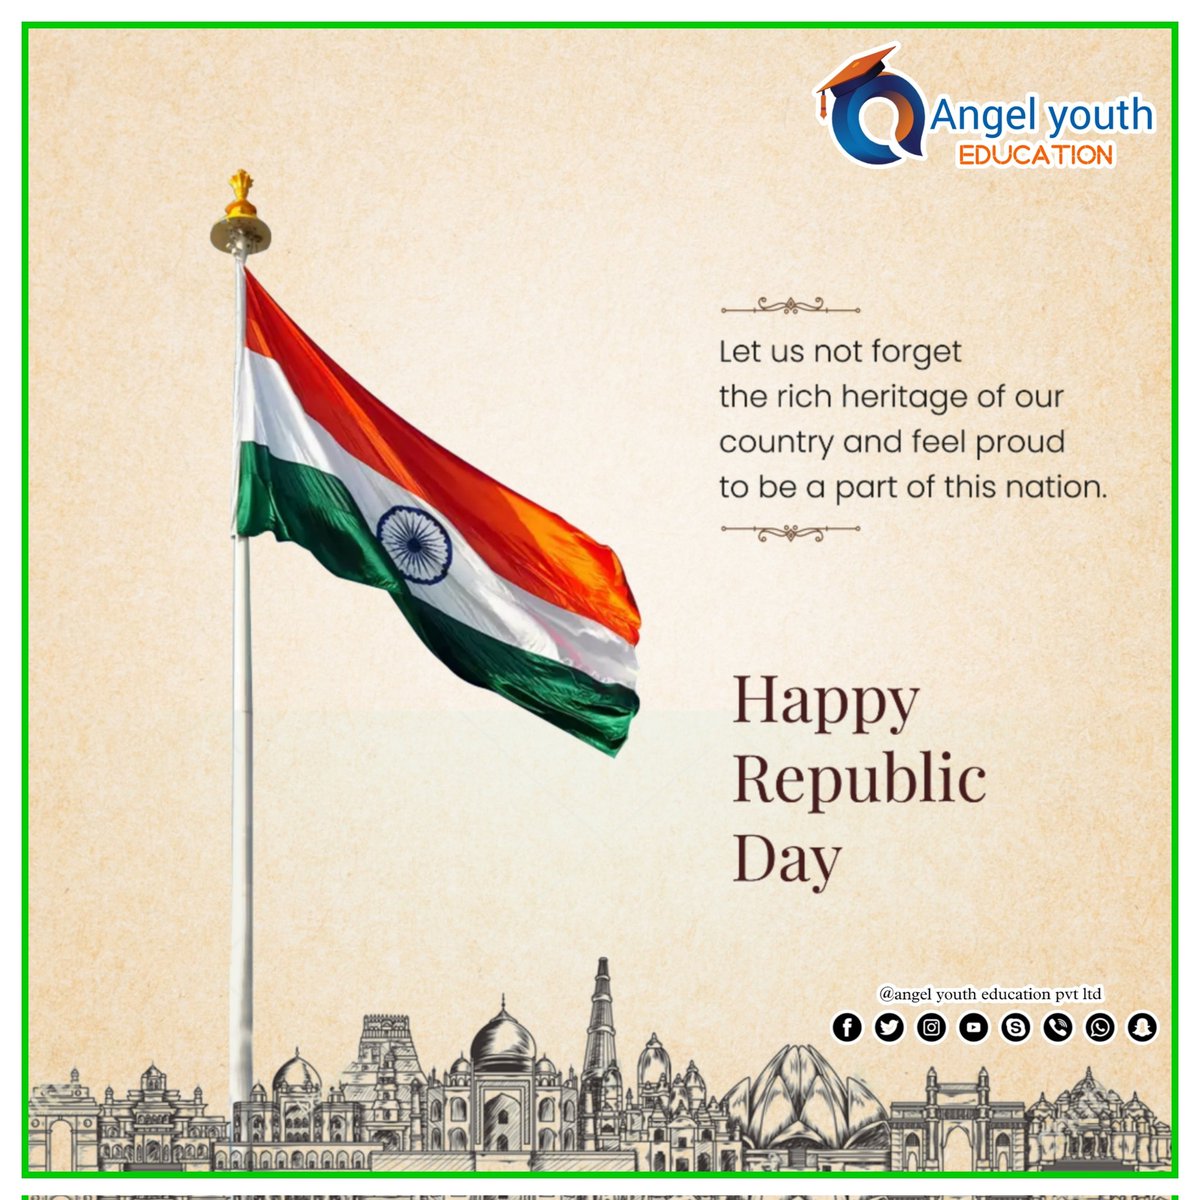 Happy Republic Day. May the flag always wave high, symbolizing the strength, courage, and unity of our great nation! Jai Hind! 🇮🇳 🇮🇳 #HappyRepublicDay #26January2024 #HappyRepublicDay #HappyRepublicDay2024 #HappyRepublicDayIndia